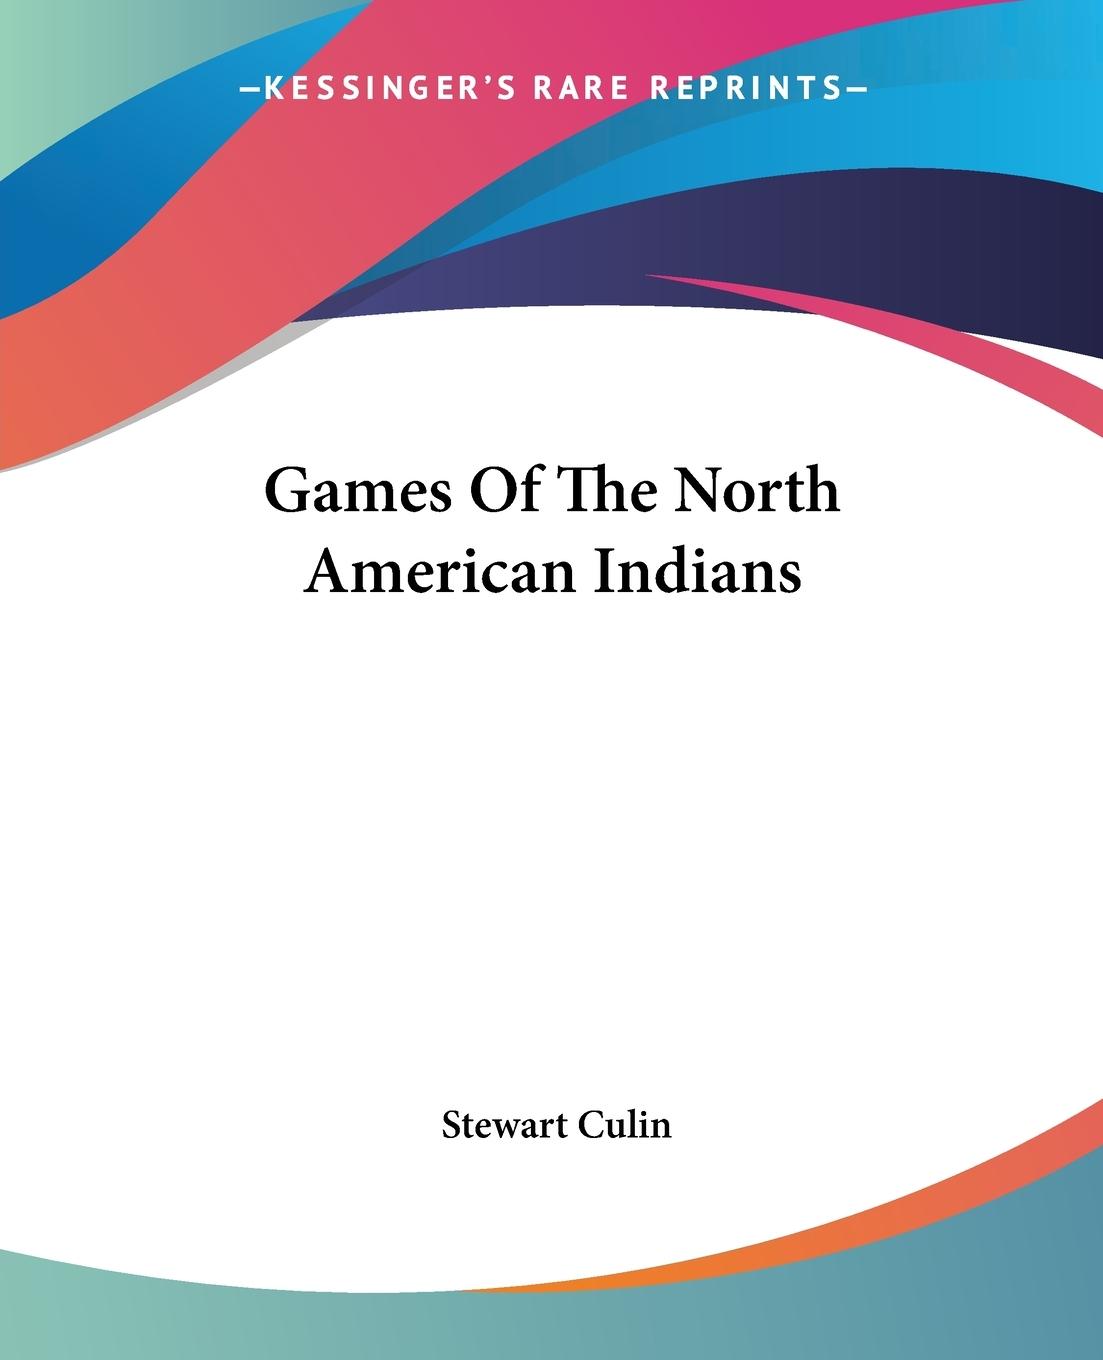 Games Of The North American Indians - Culin, Stewart